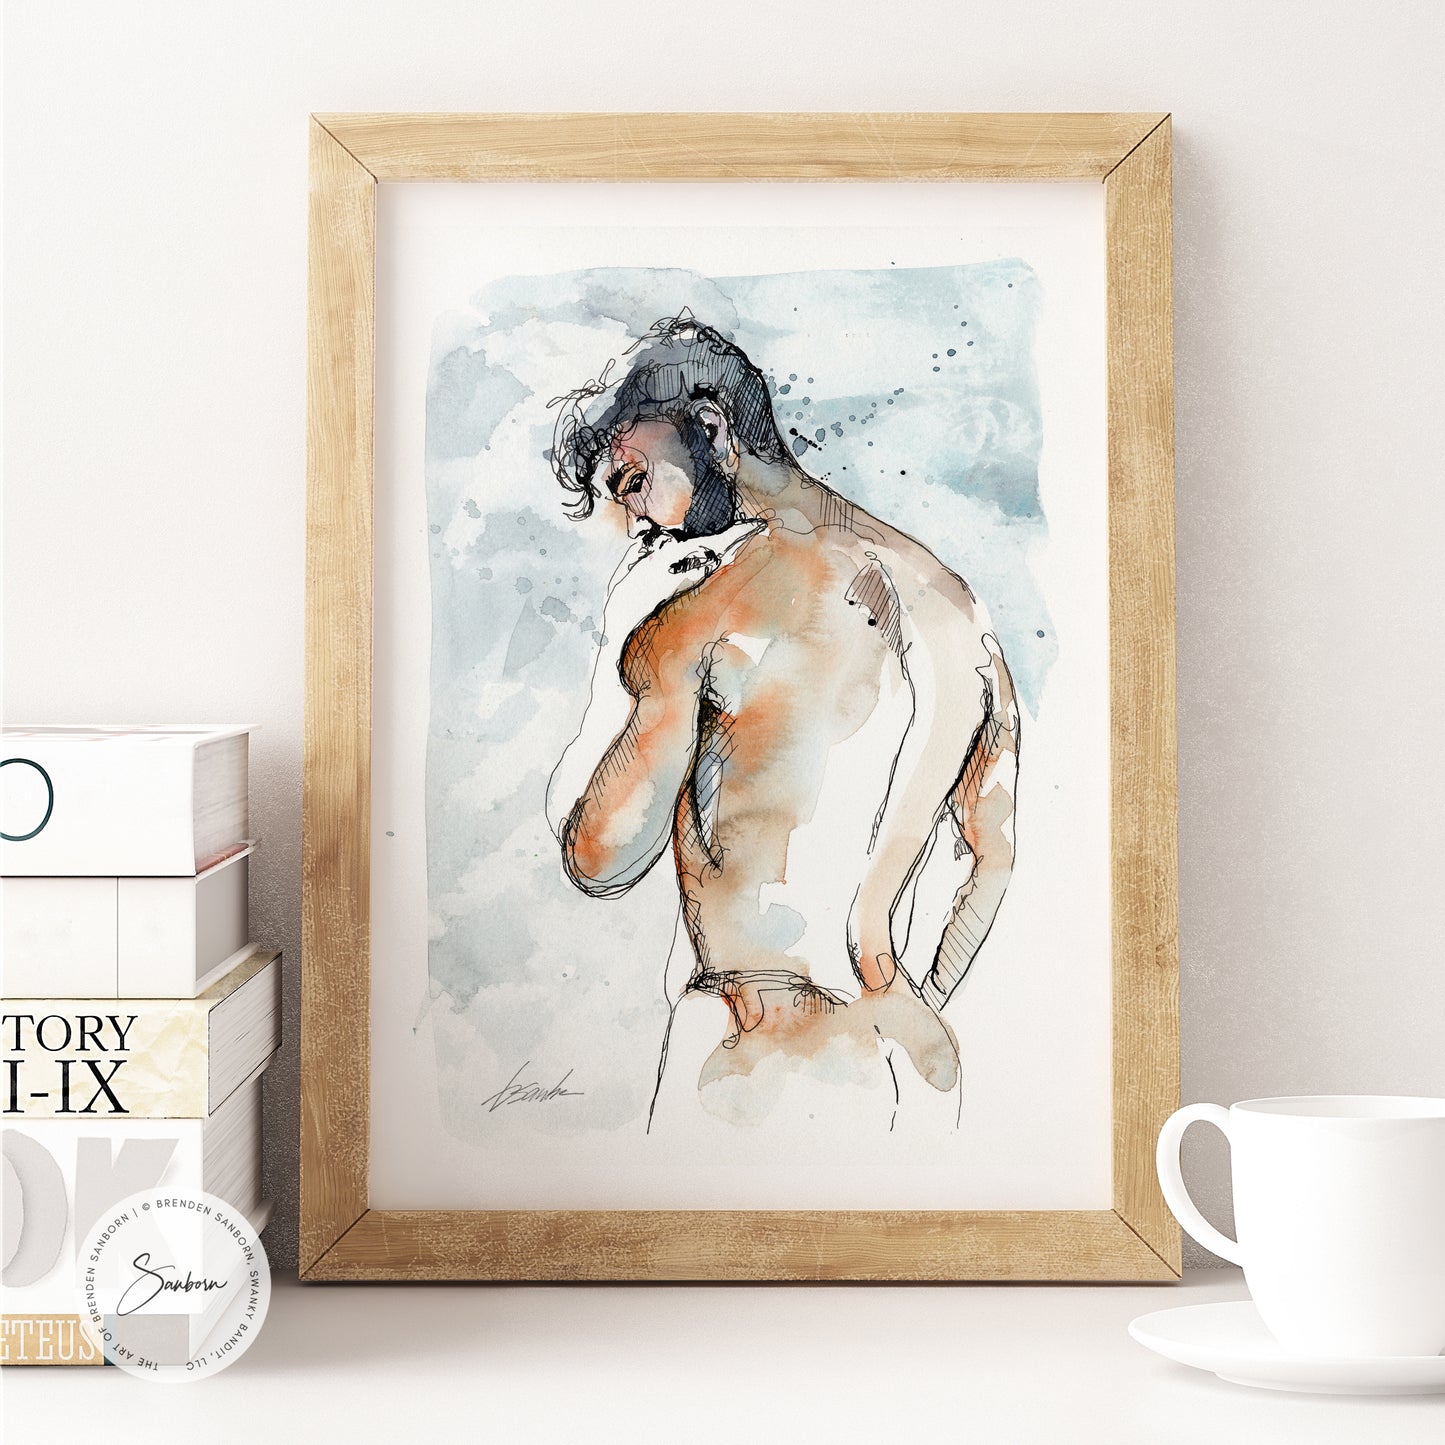 Obsidian Allure: 9x12" Watercolor of a Sensual Male with Strong Back & Raven-Hued Hair - Original by Brenden Sanborn